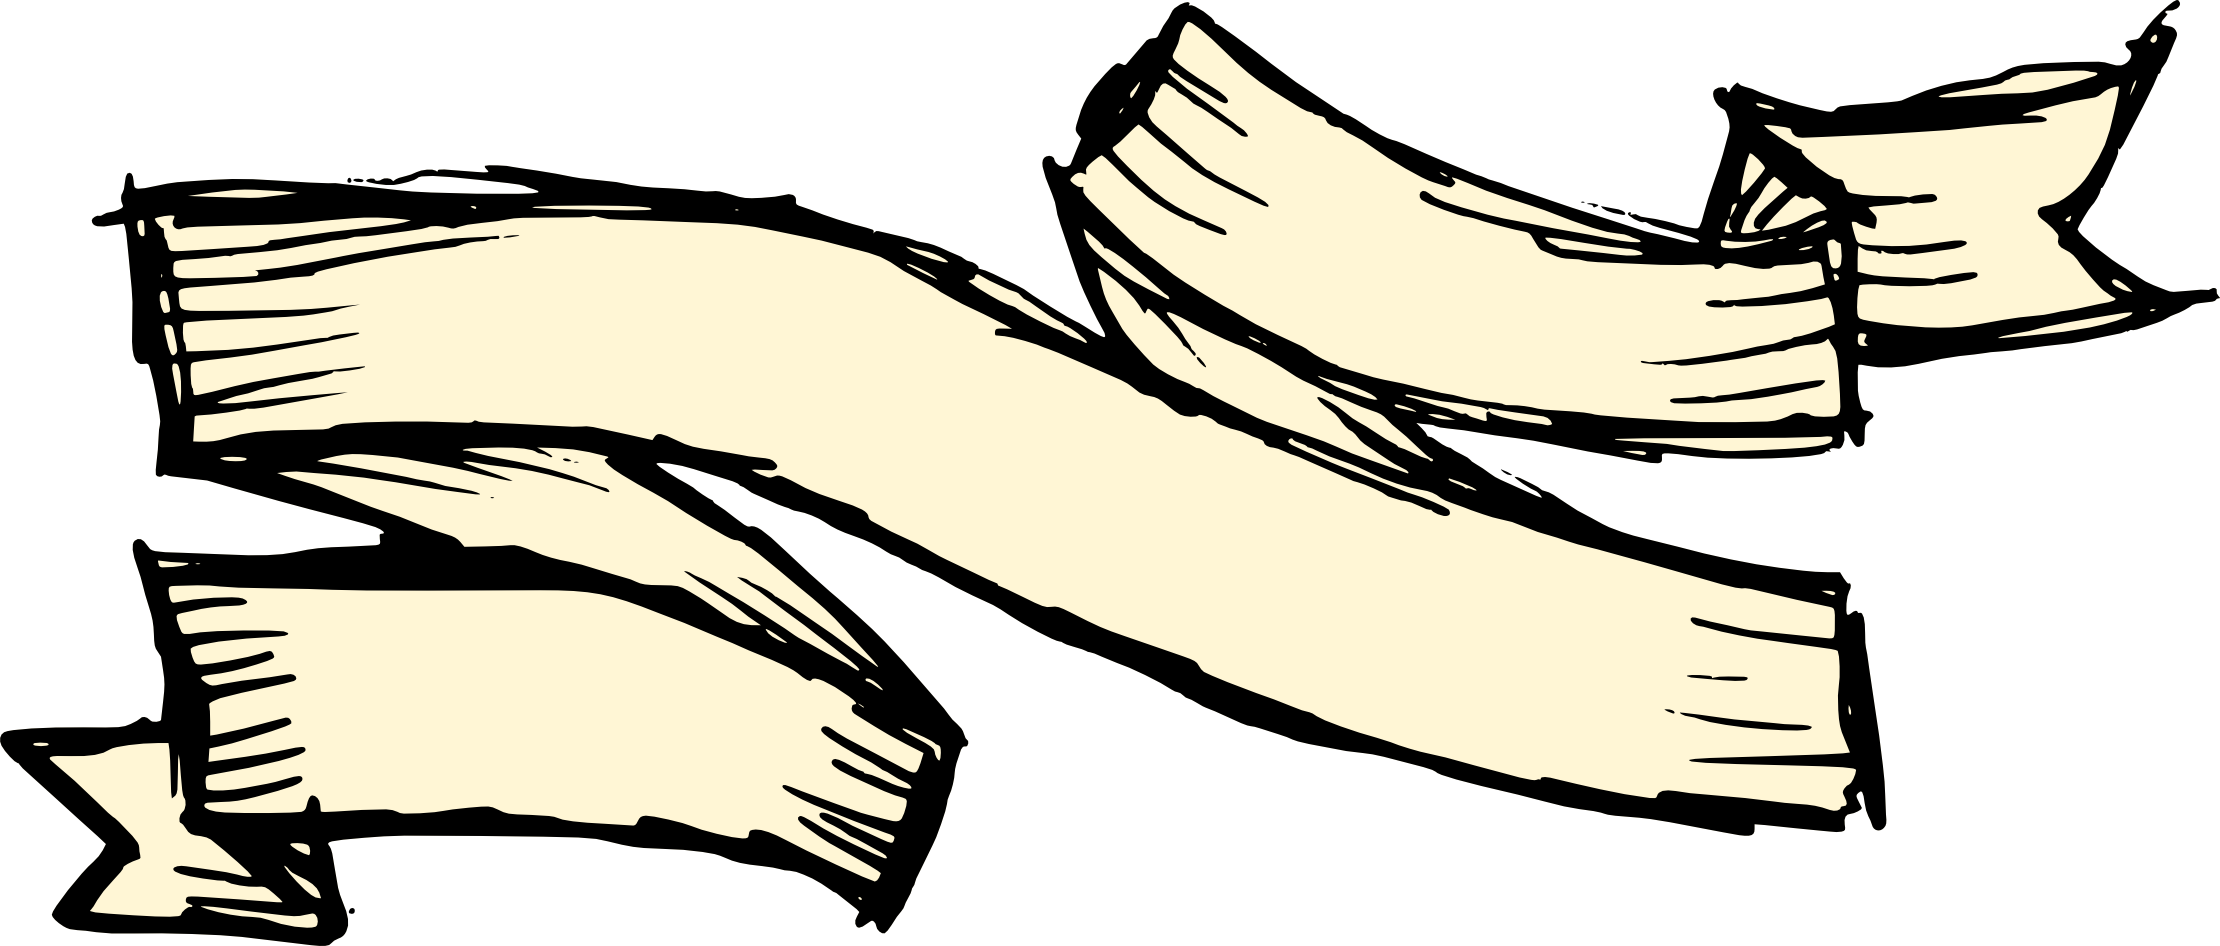 dagger clipart hand drawing